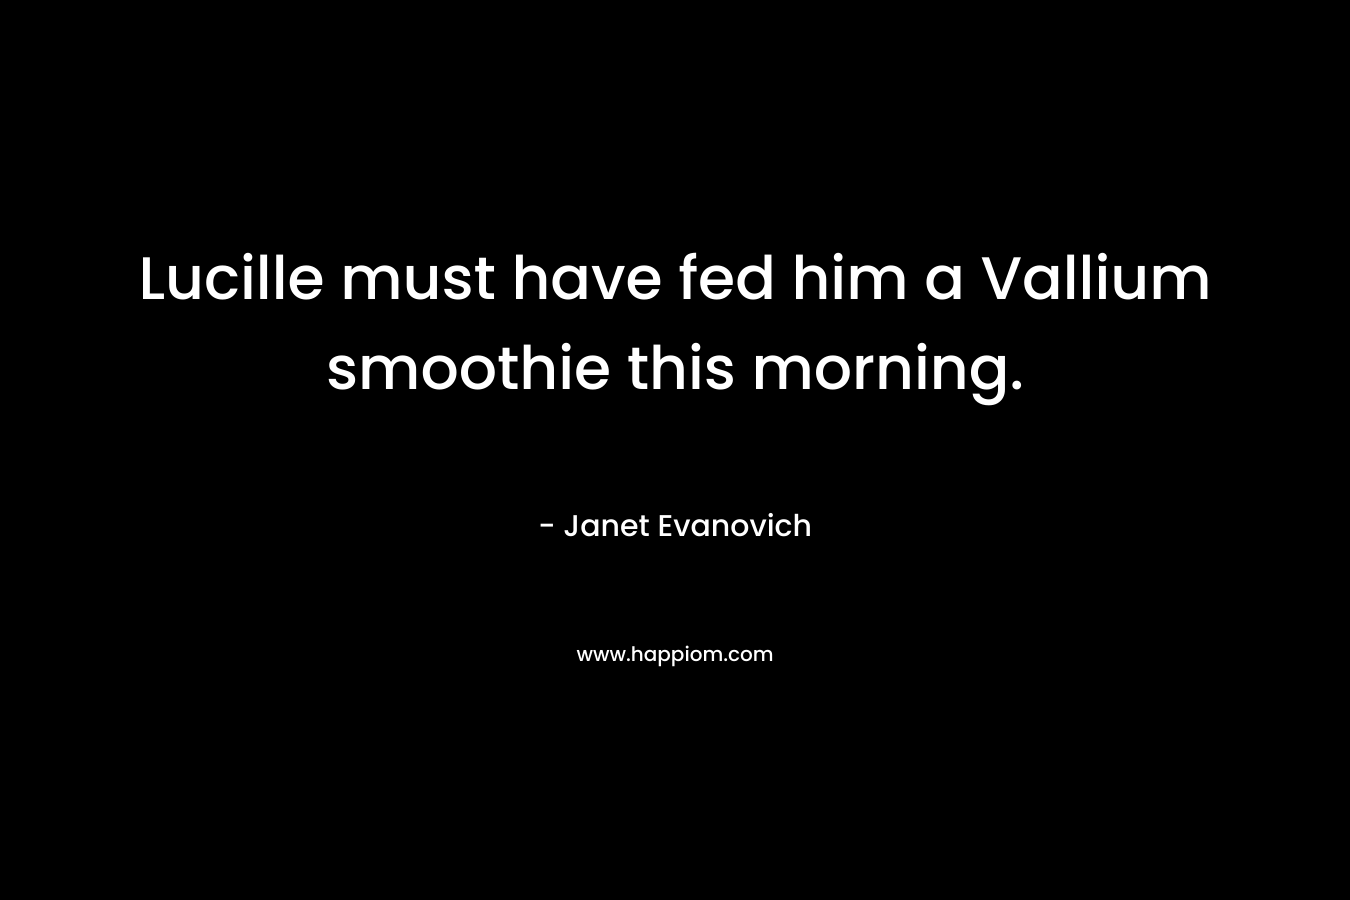 Lucille must have fed him a Vallium smoothie this morning. – Janet Evanovich